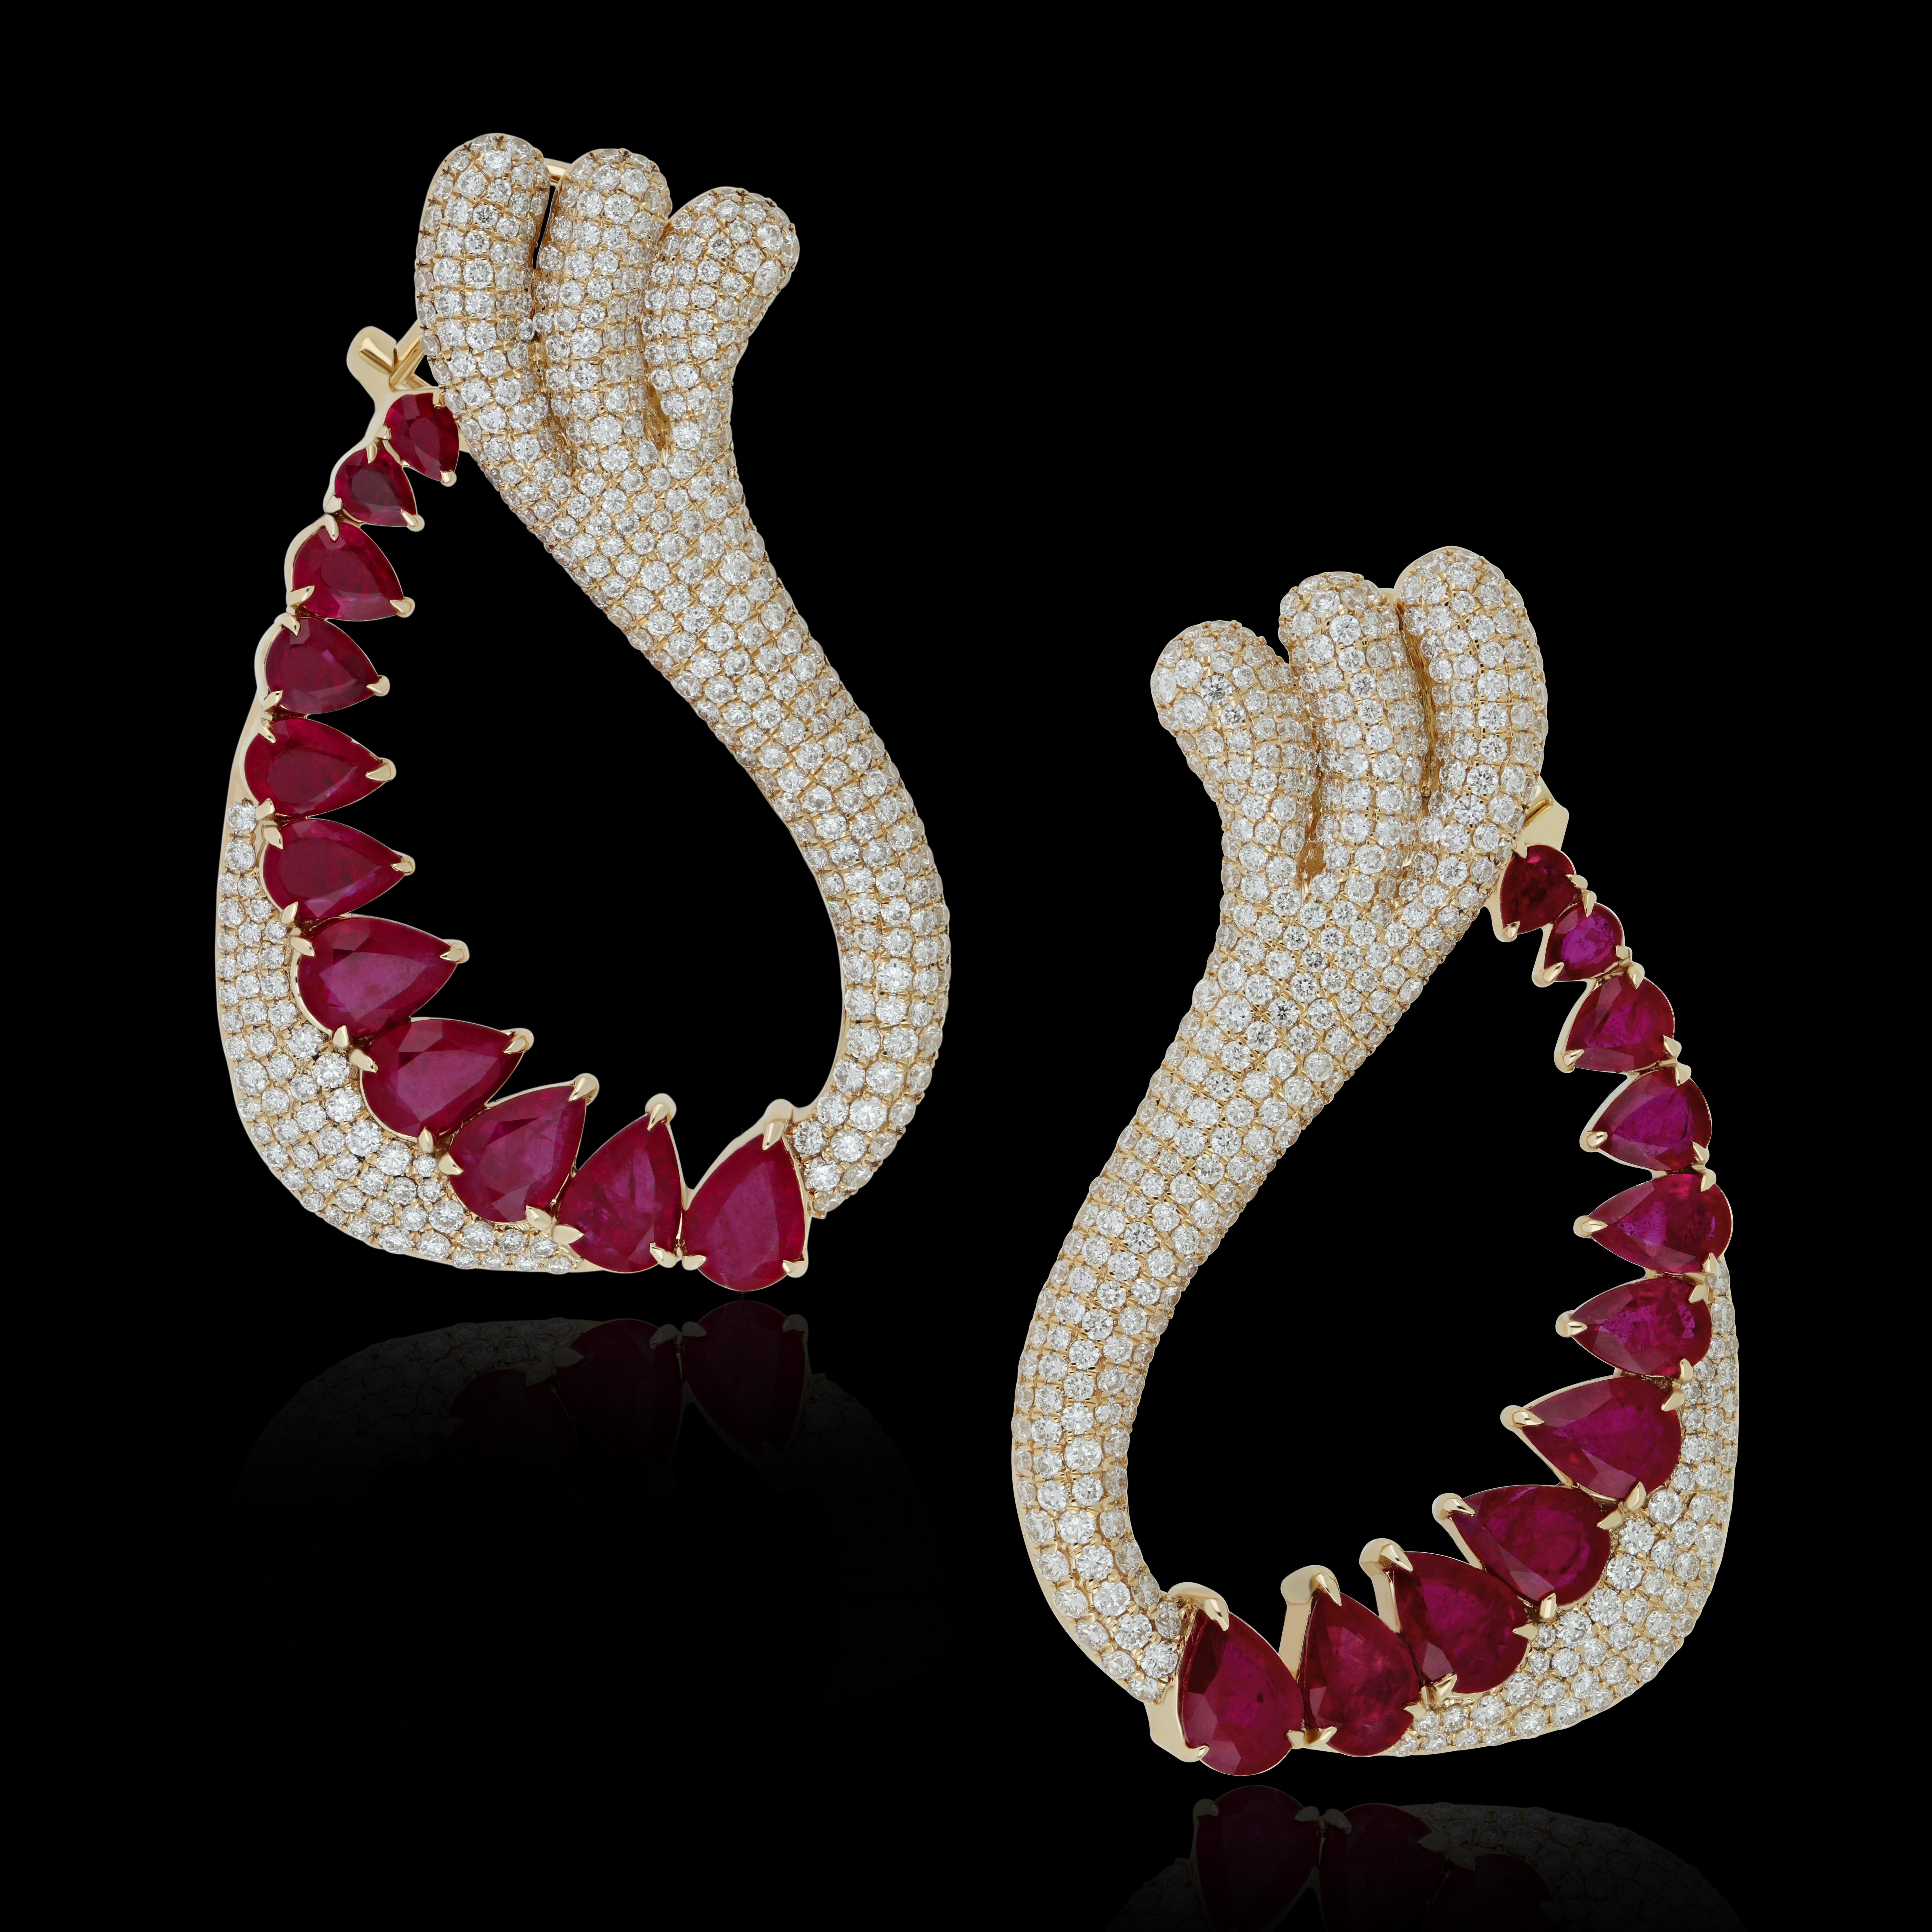 Elegant and Exquisitely detailed 14k Yellow Gold Earring with 10.5 Cts (approx.) Pear shape   Ruby and accented with Micro pave set Diamonds, weighing approx.  4.85 CT's (approx.). total carat weight to further enhance the beauty of the Earring.